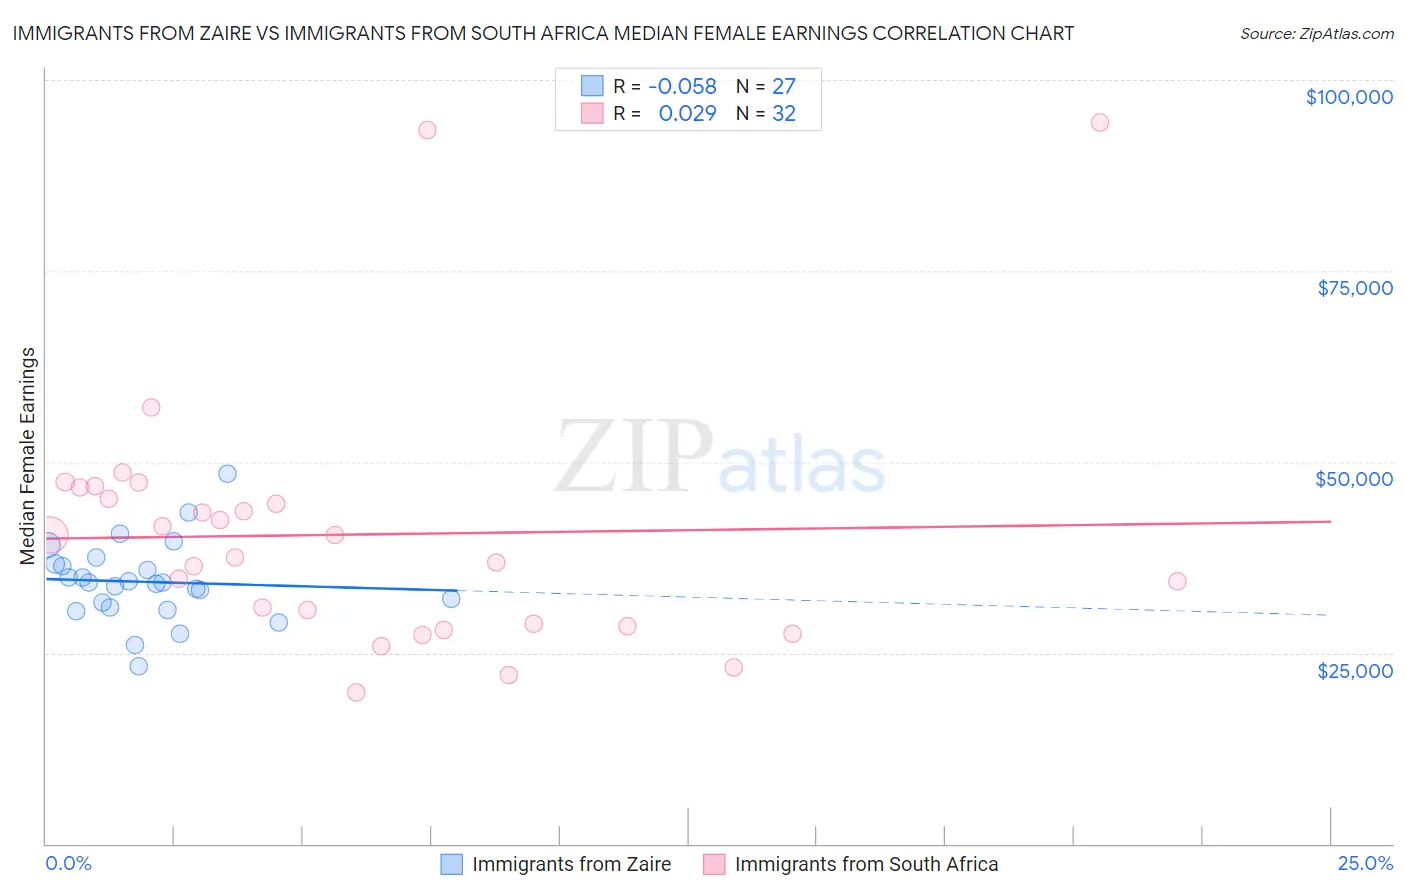 Immigrants from Zaire vs Immigrants from South Africa Median Female Earnings